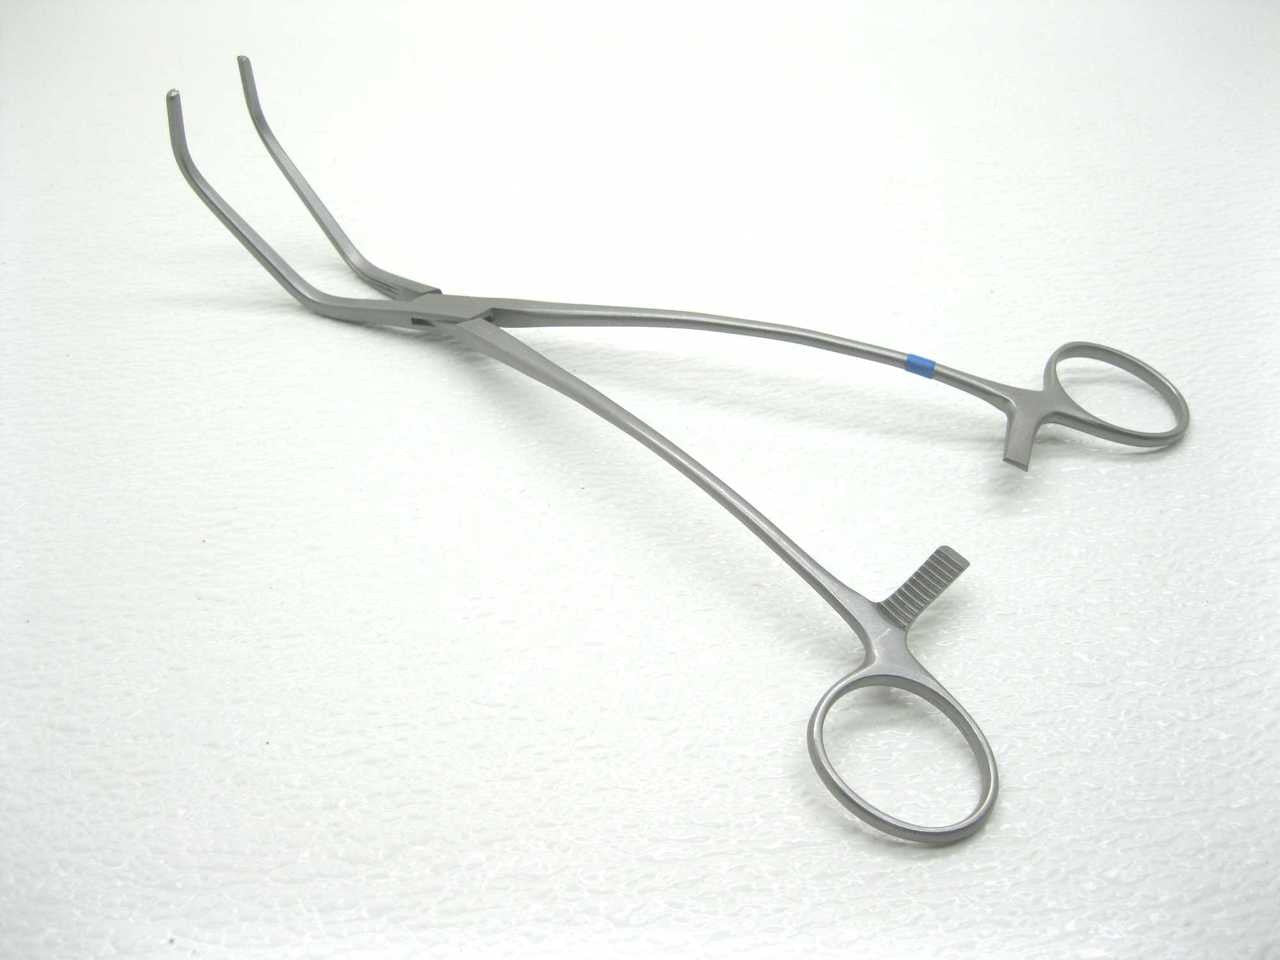 Booth Medical - DeBakey Tangential Occlusion Clamp, Codman - 37-1194